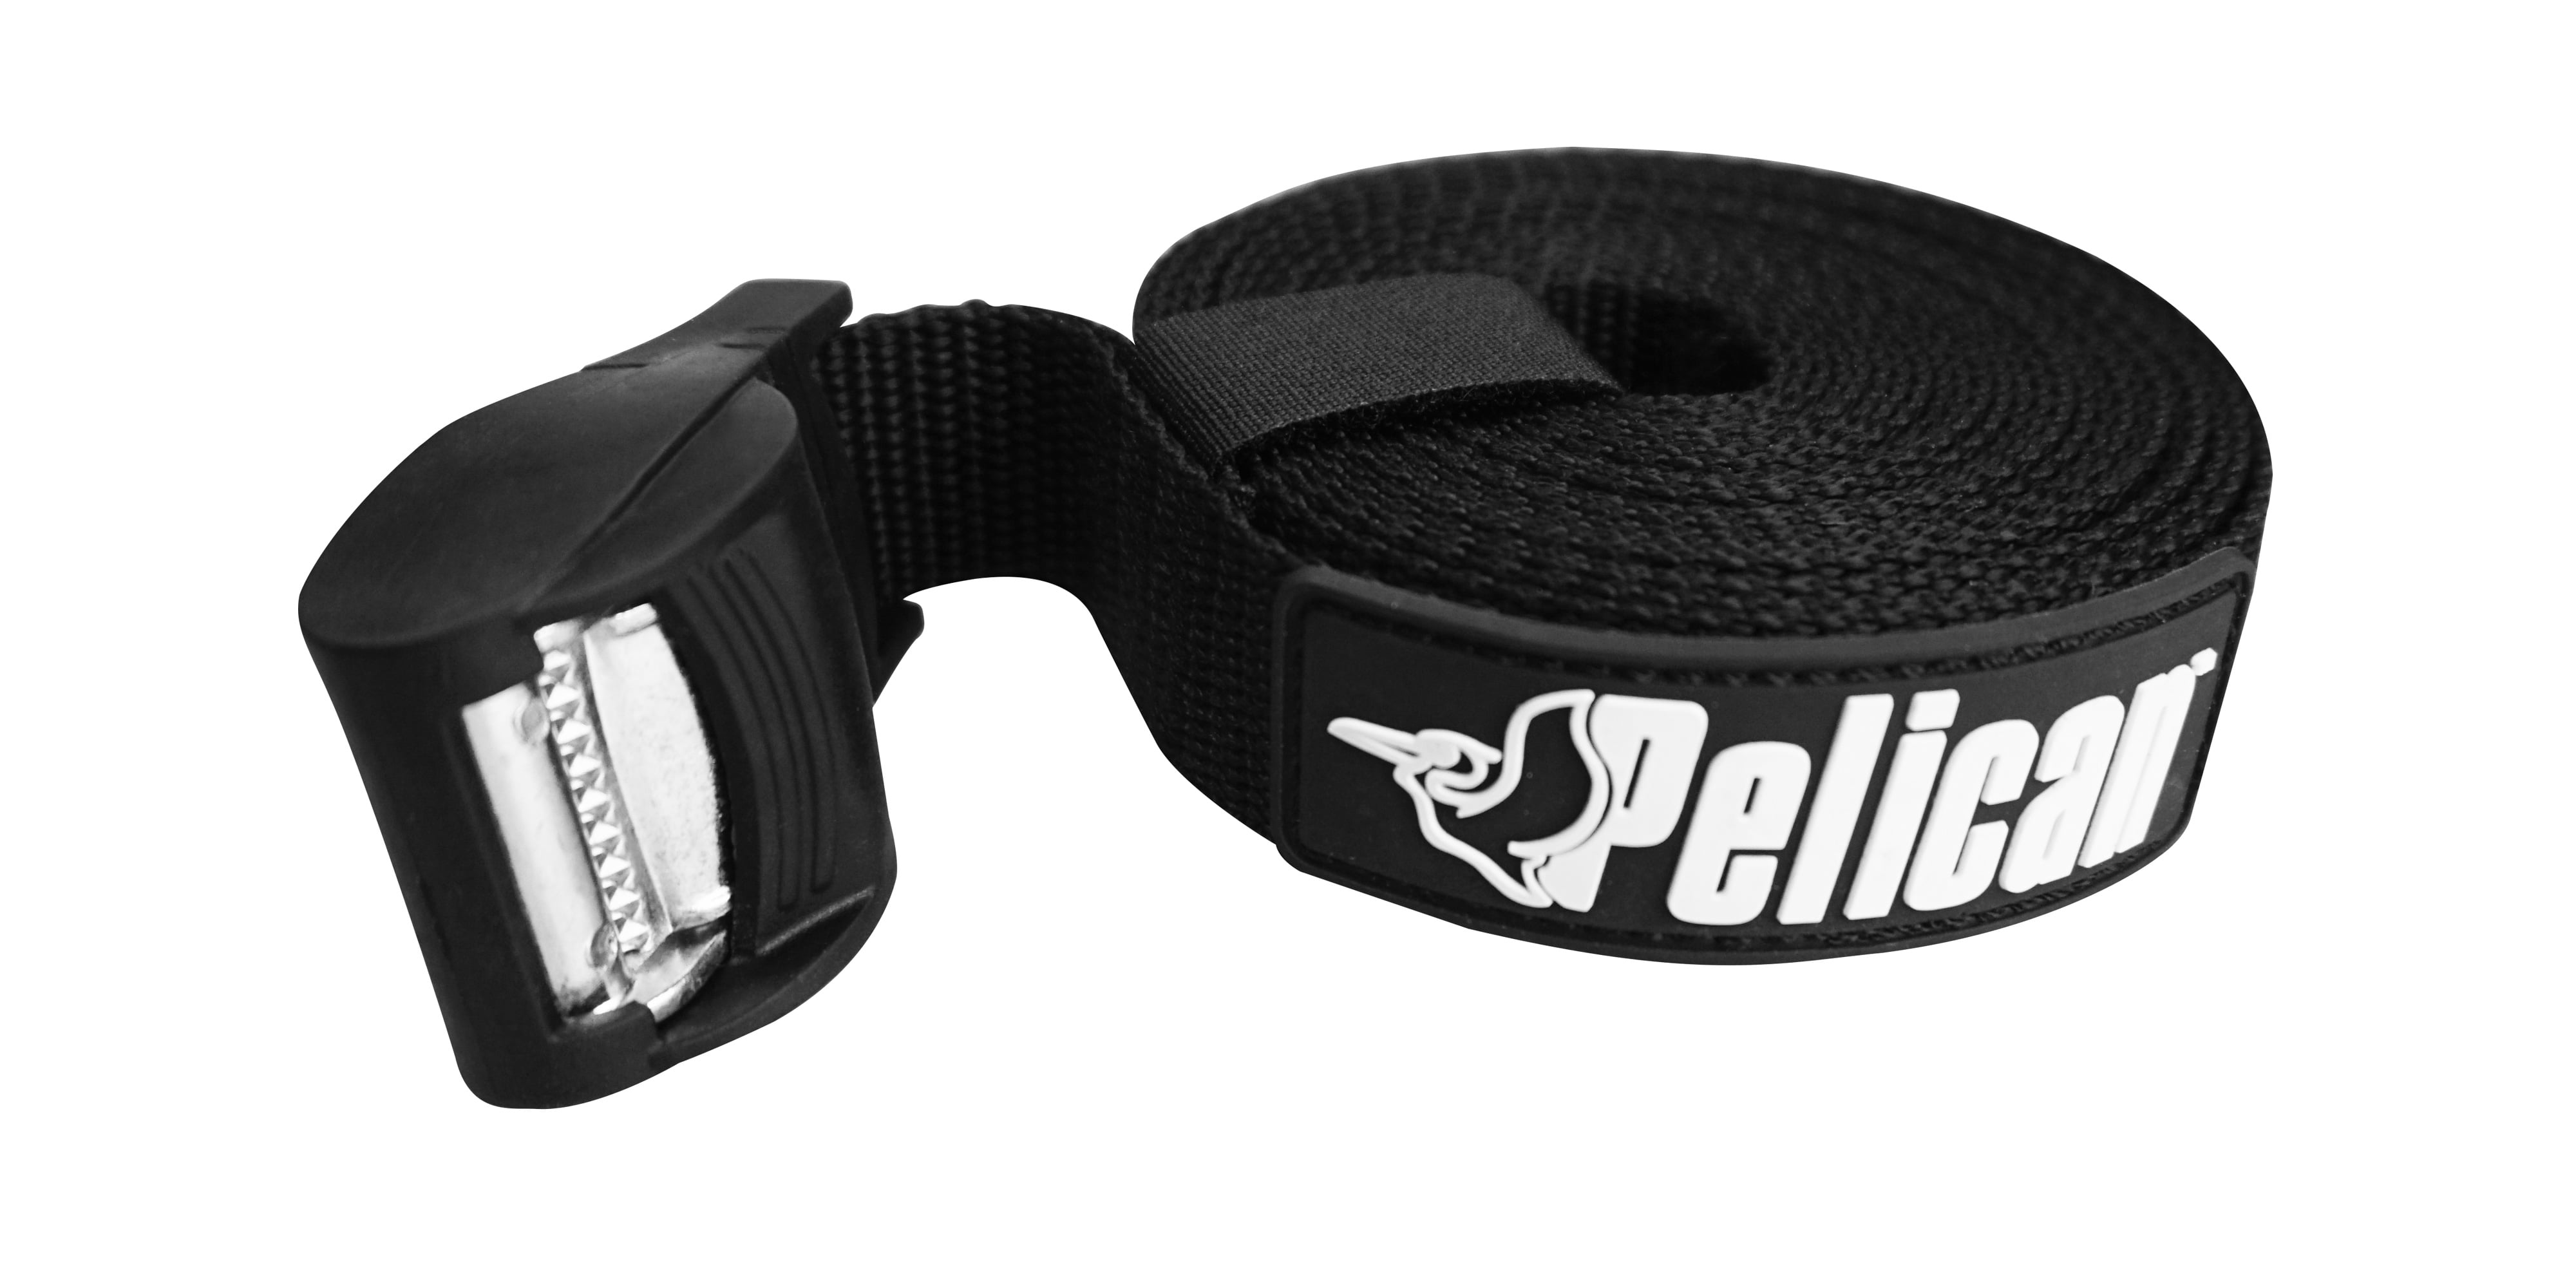 Pelican - Roof Rack Tie Down Deluxe Strap with Buckle Bumper - For